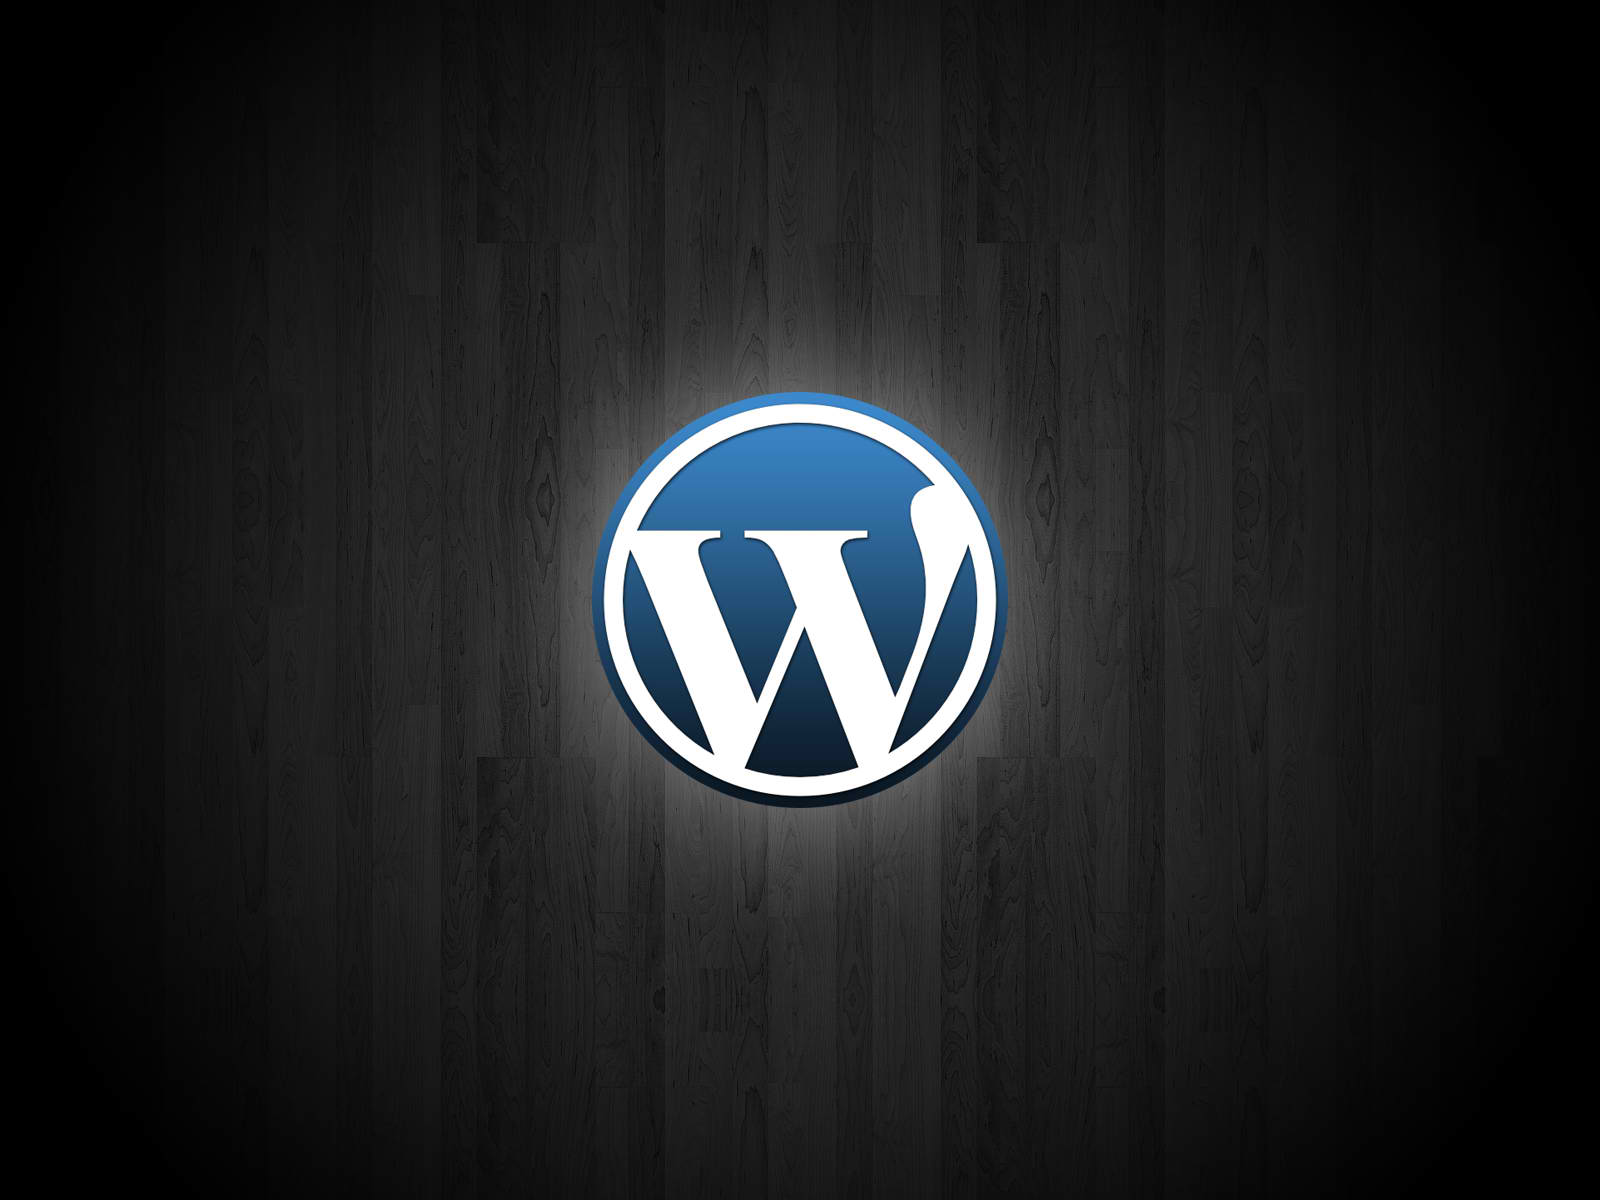 Why Use WordPress for Your Business Site